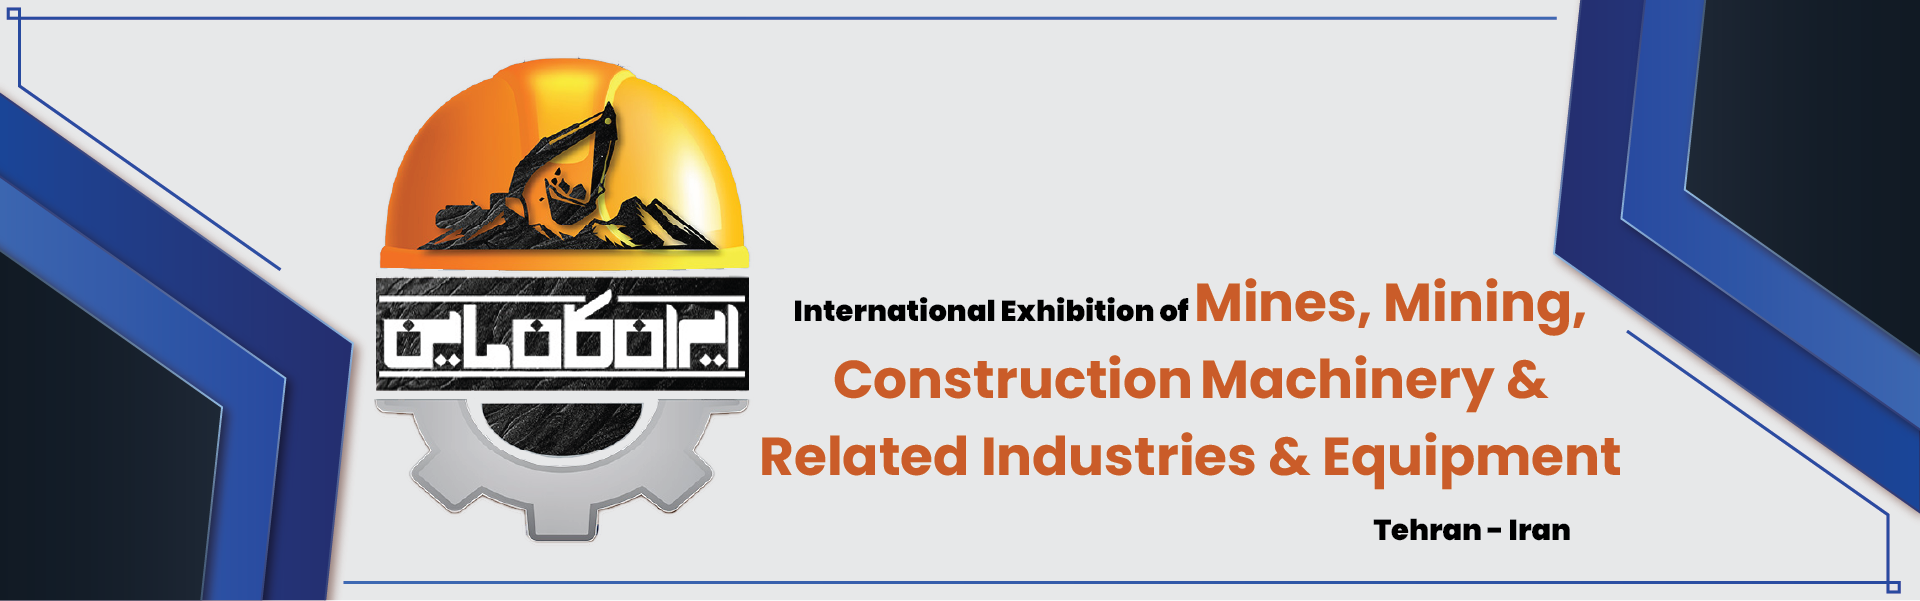 mining industry and machinery exhibition Iran